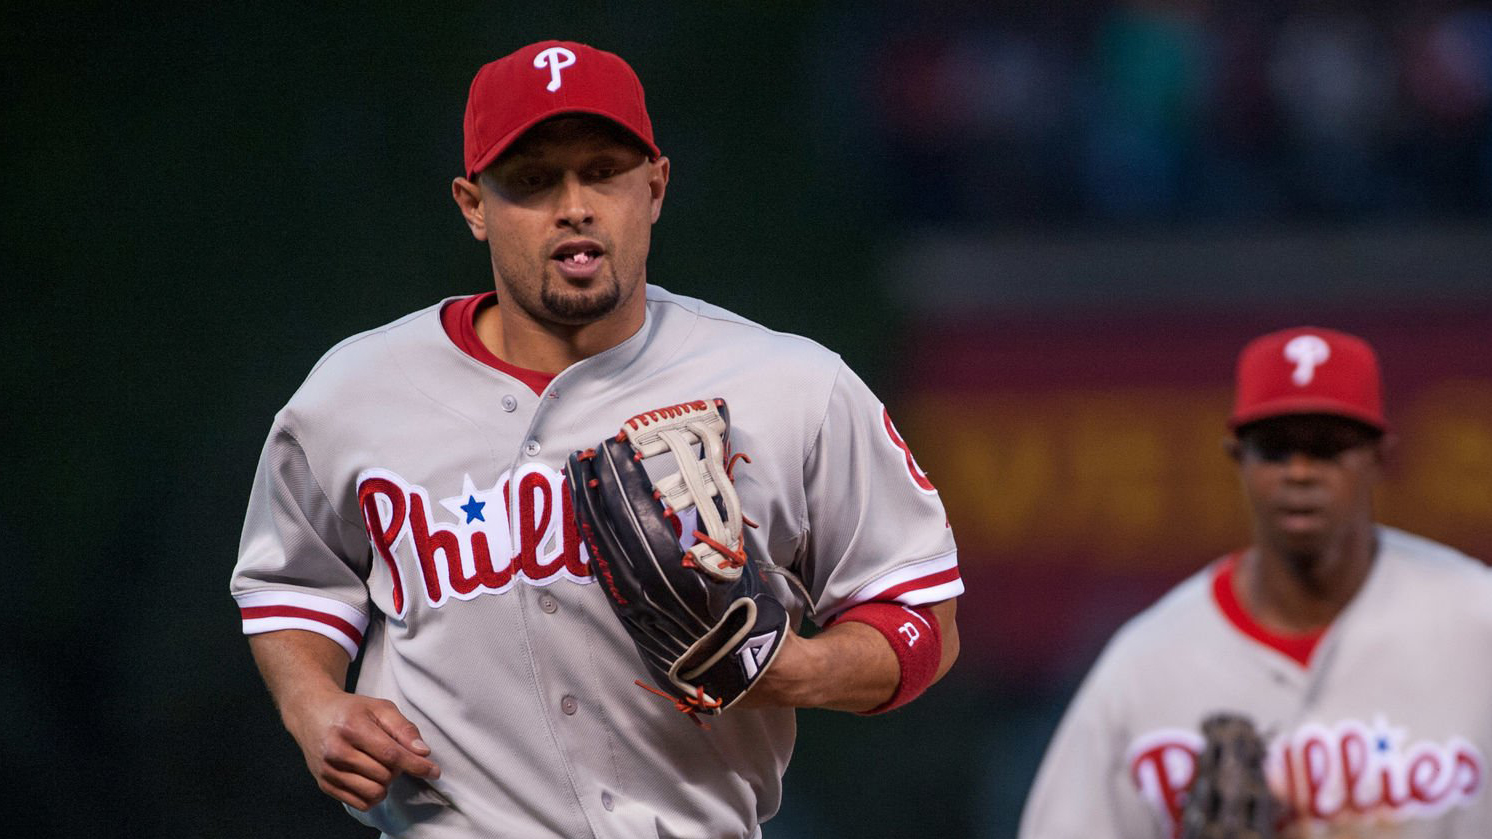 Something Tells Me the Phillies Fan Who Caught Shane Victorino's